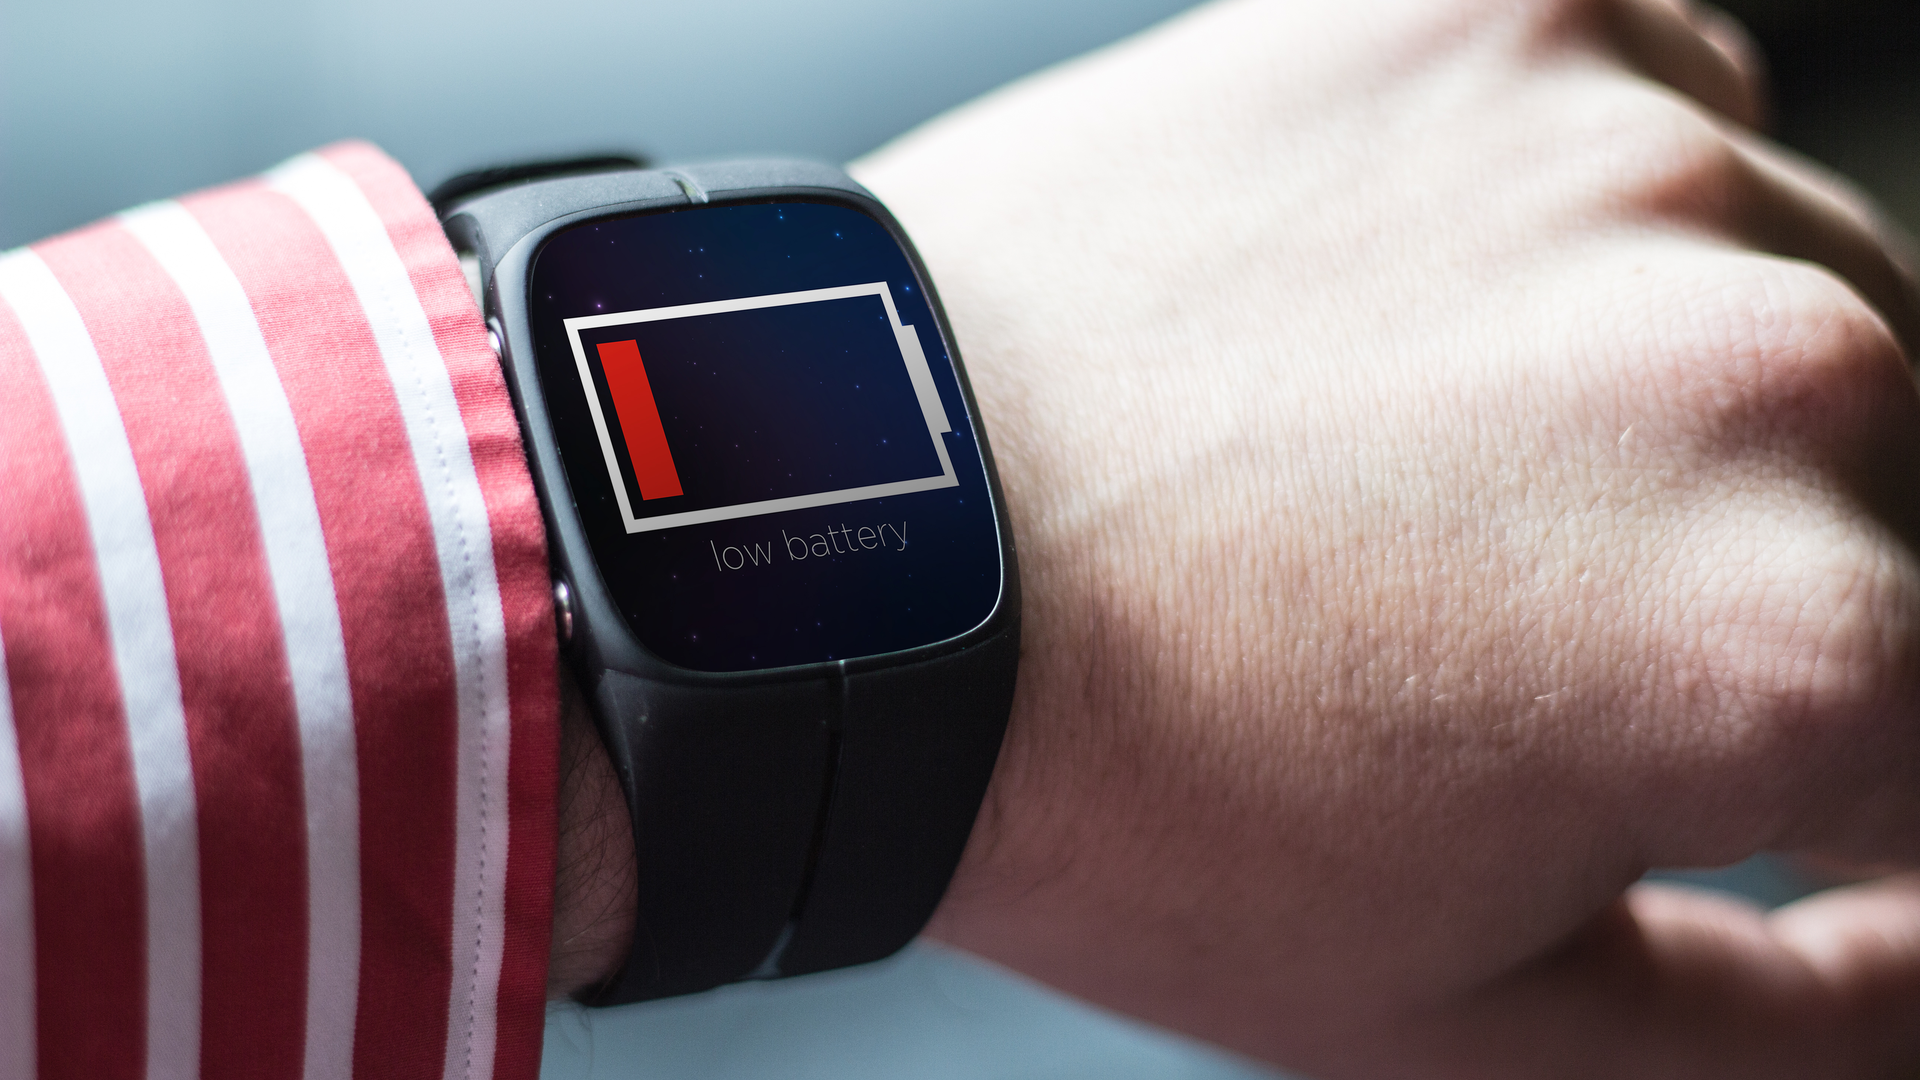 lifestyle concept: low battery smartwatch. Screen graphics are made up.